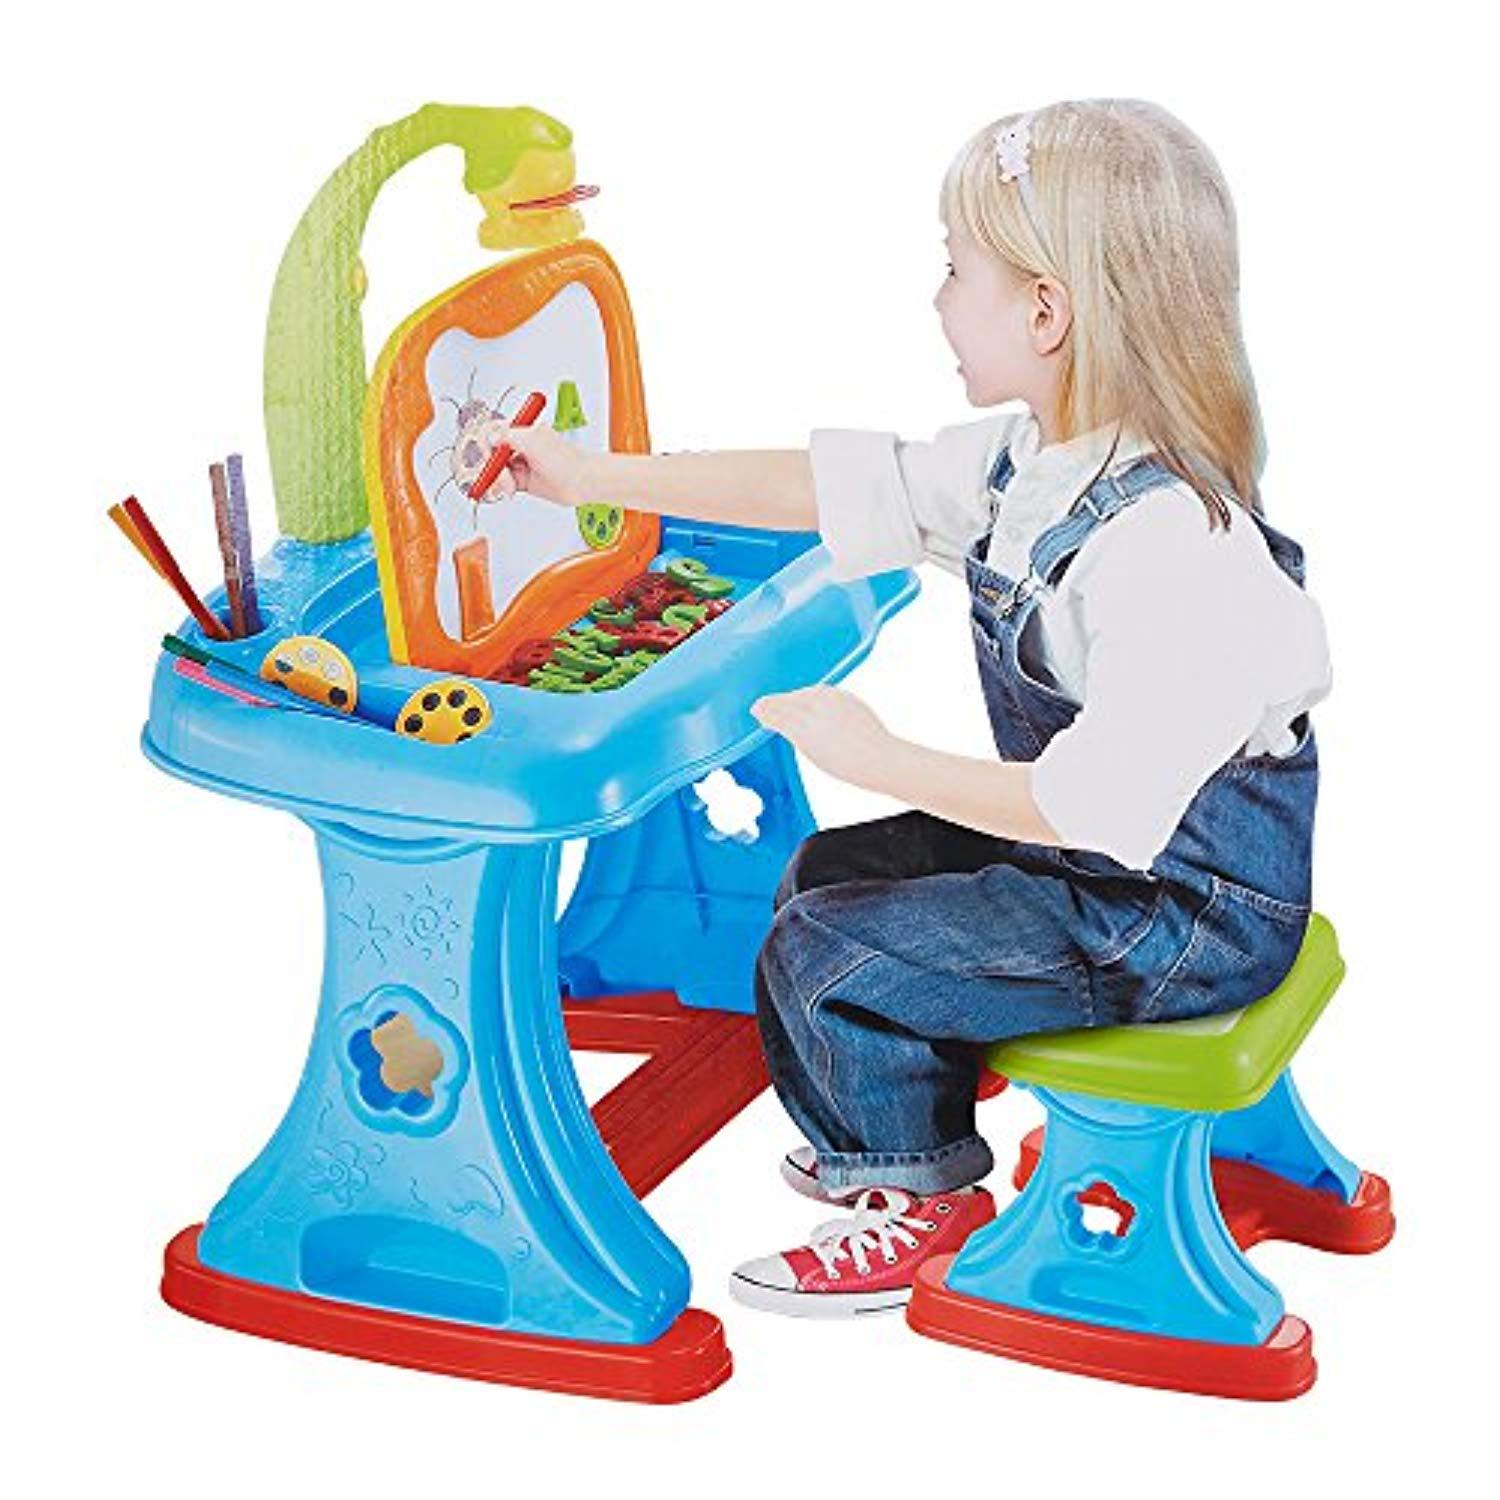 Bosonshop Projector Colorful Learning Desk 4 in 1 Lamp, Projection Painting and Spelling Sketch